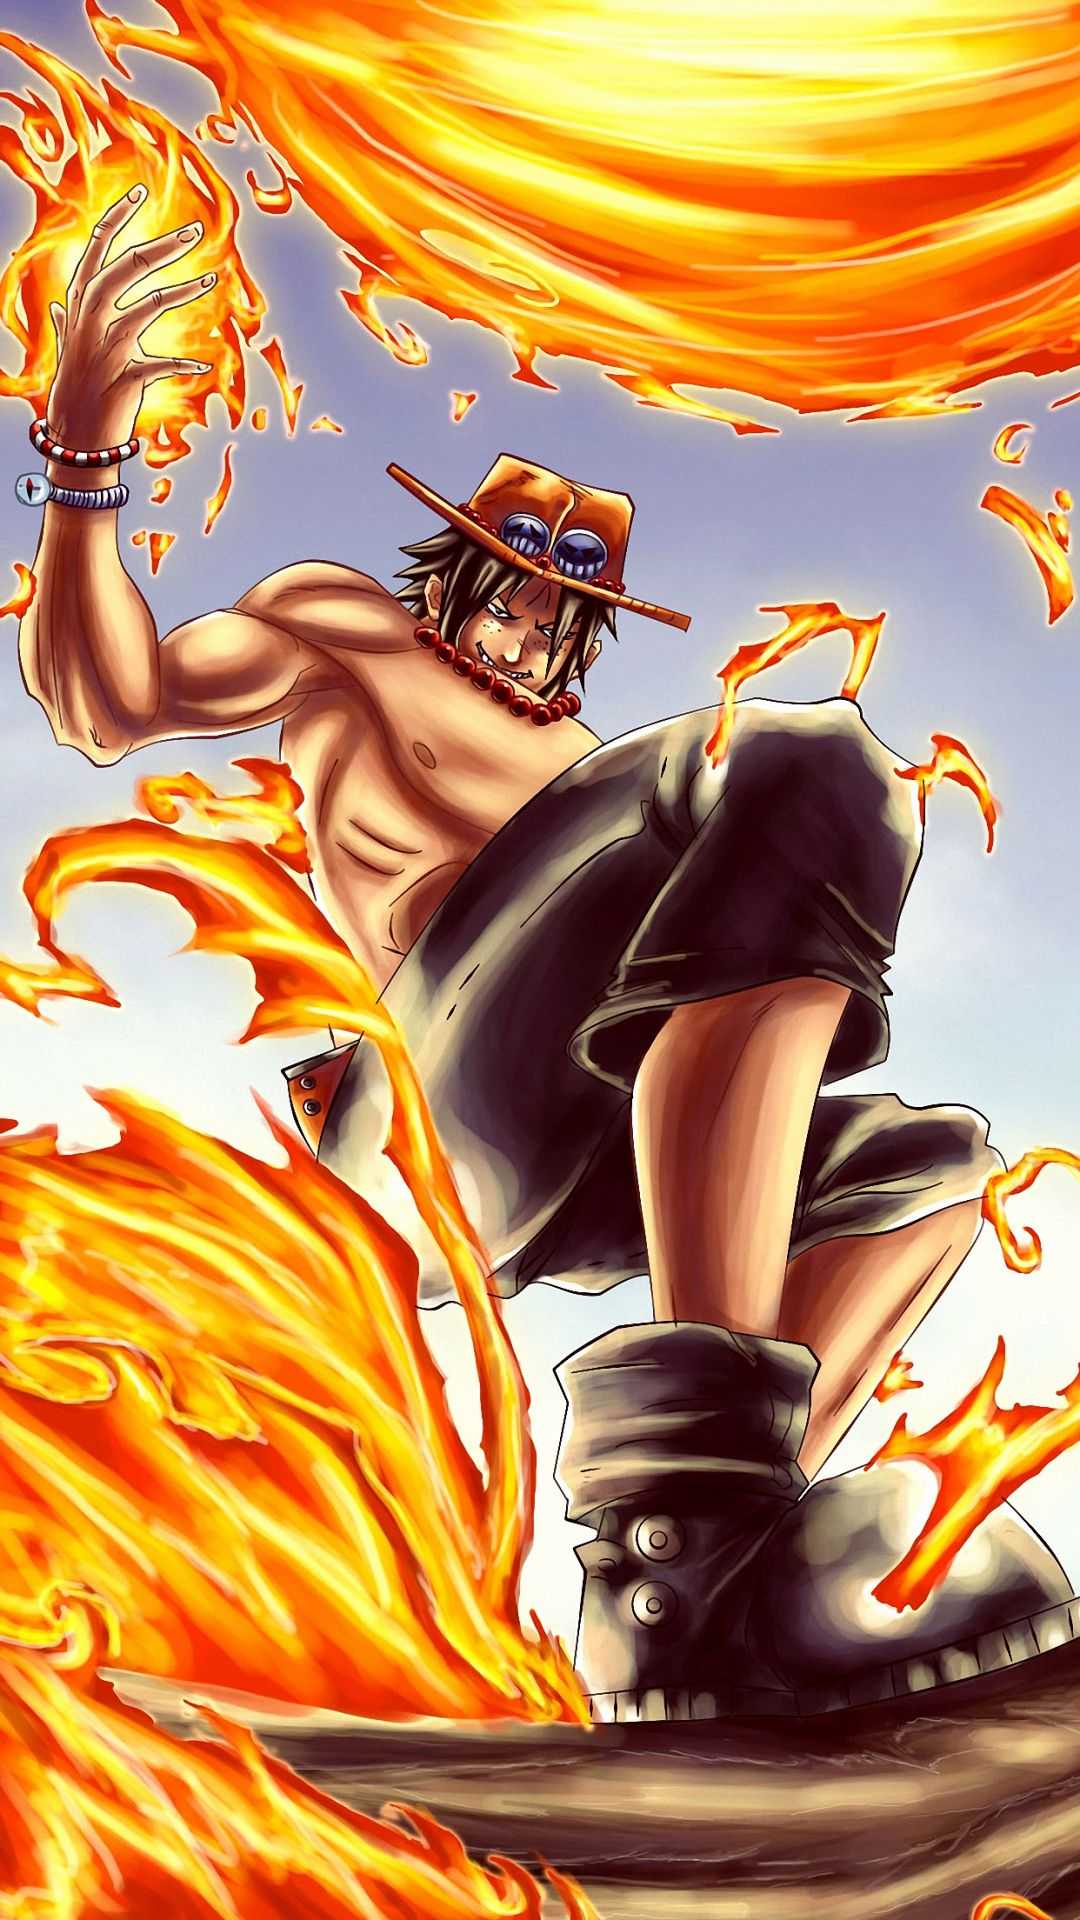 One Piece iphone Wallpaper - NawPic